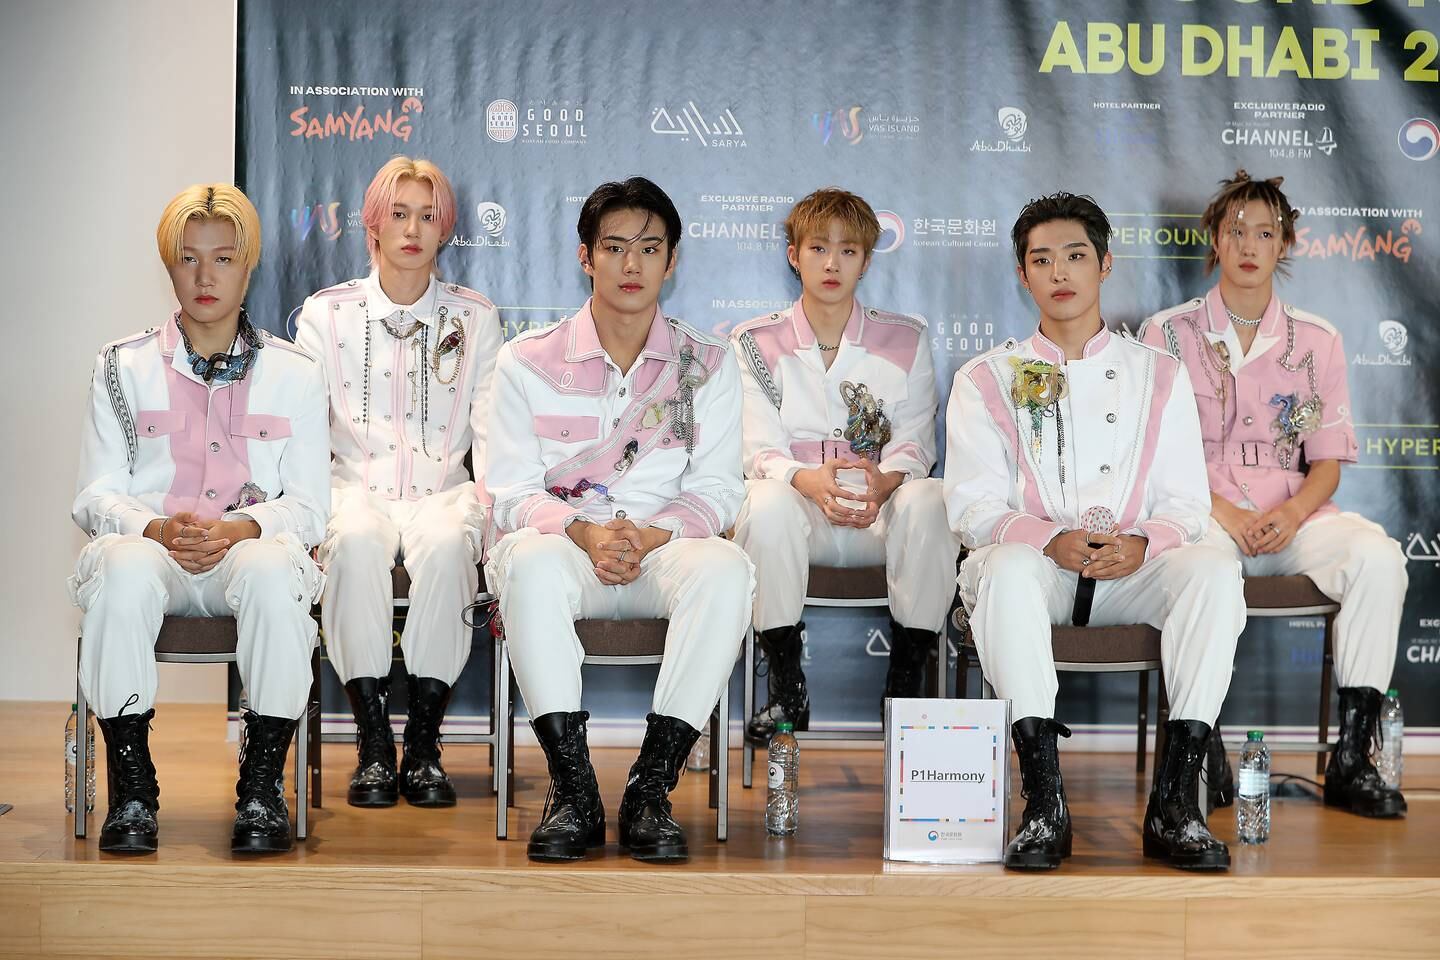 K-pop boy band P1Harmony, who performed at Hyperound K-Fest Abu Dhabi, said it was 'unreal' meeting their fans in the UAE. Pawan Singh / The National